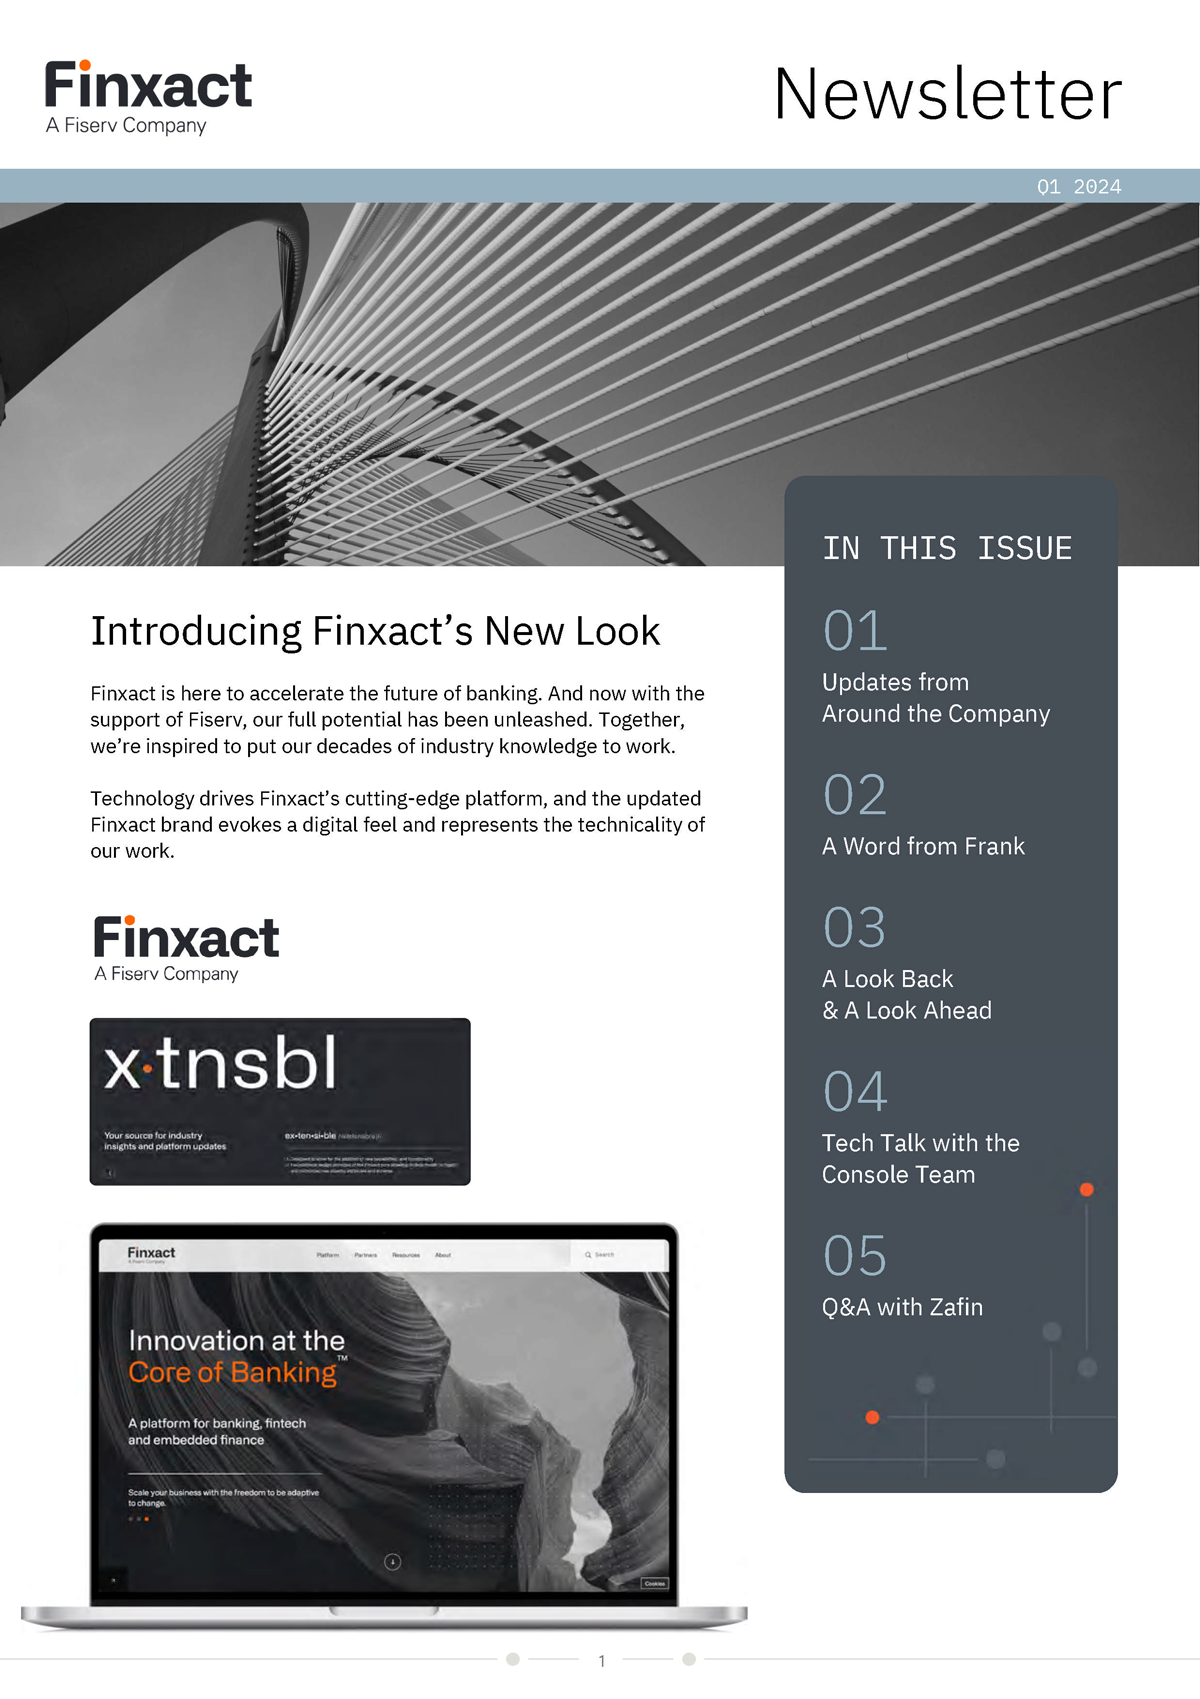 Finxact Newsletter Image